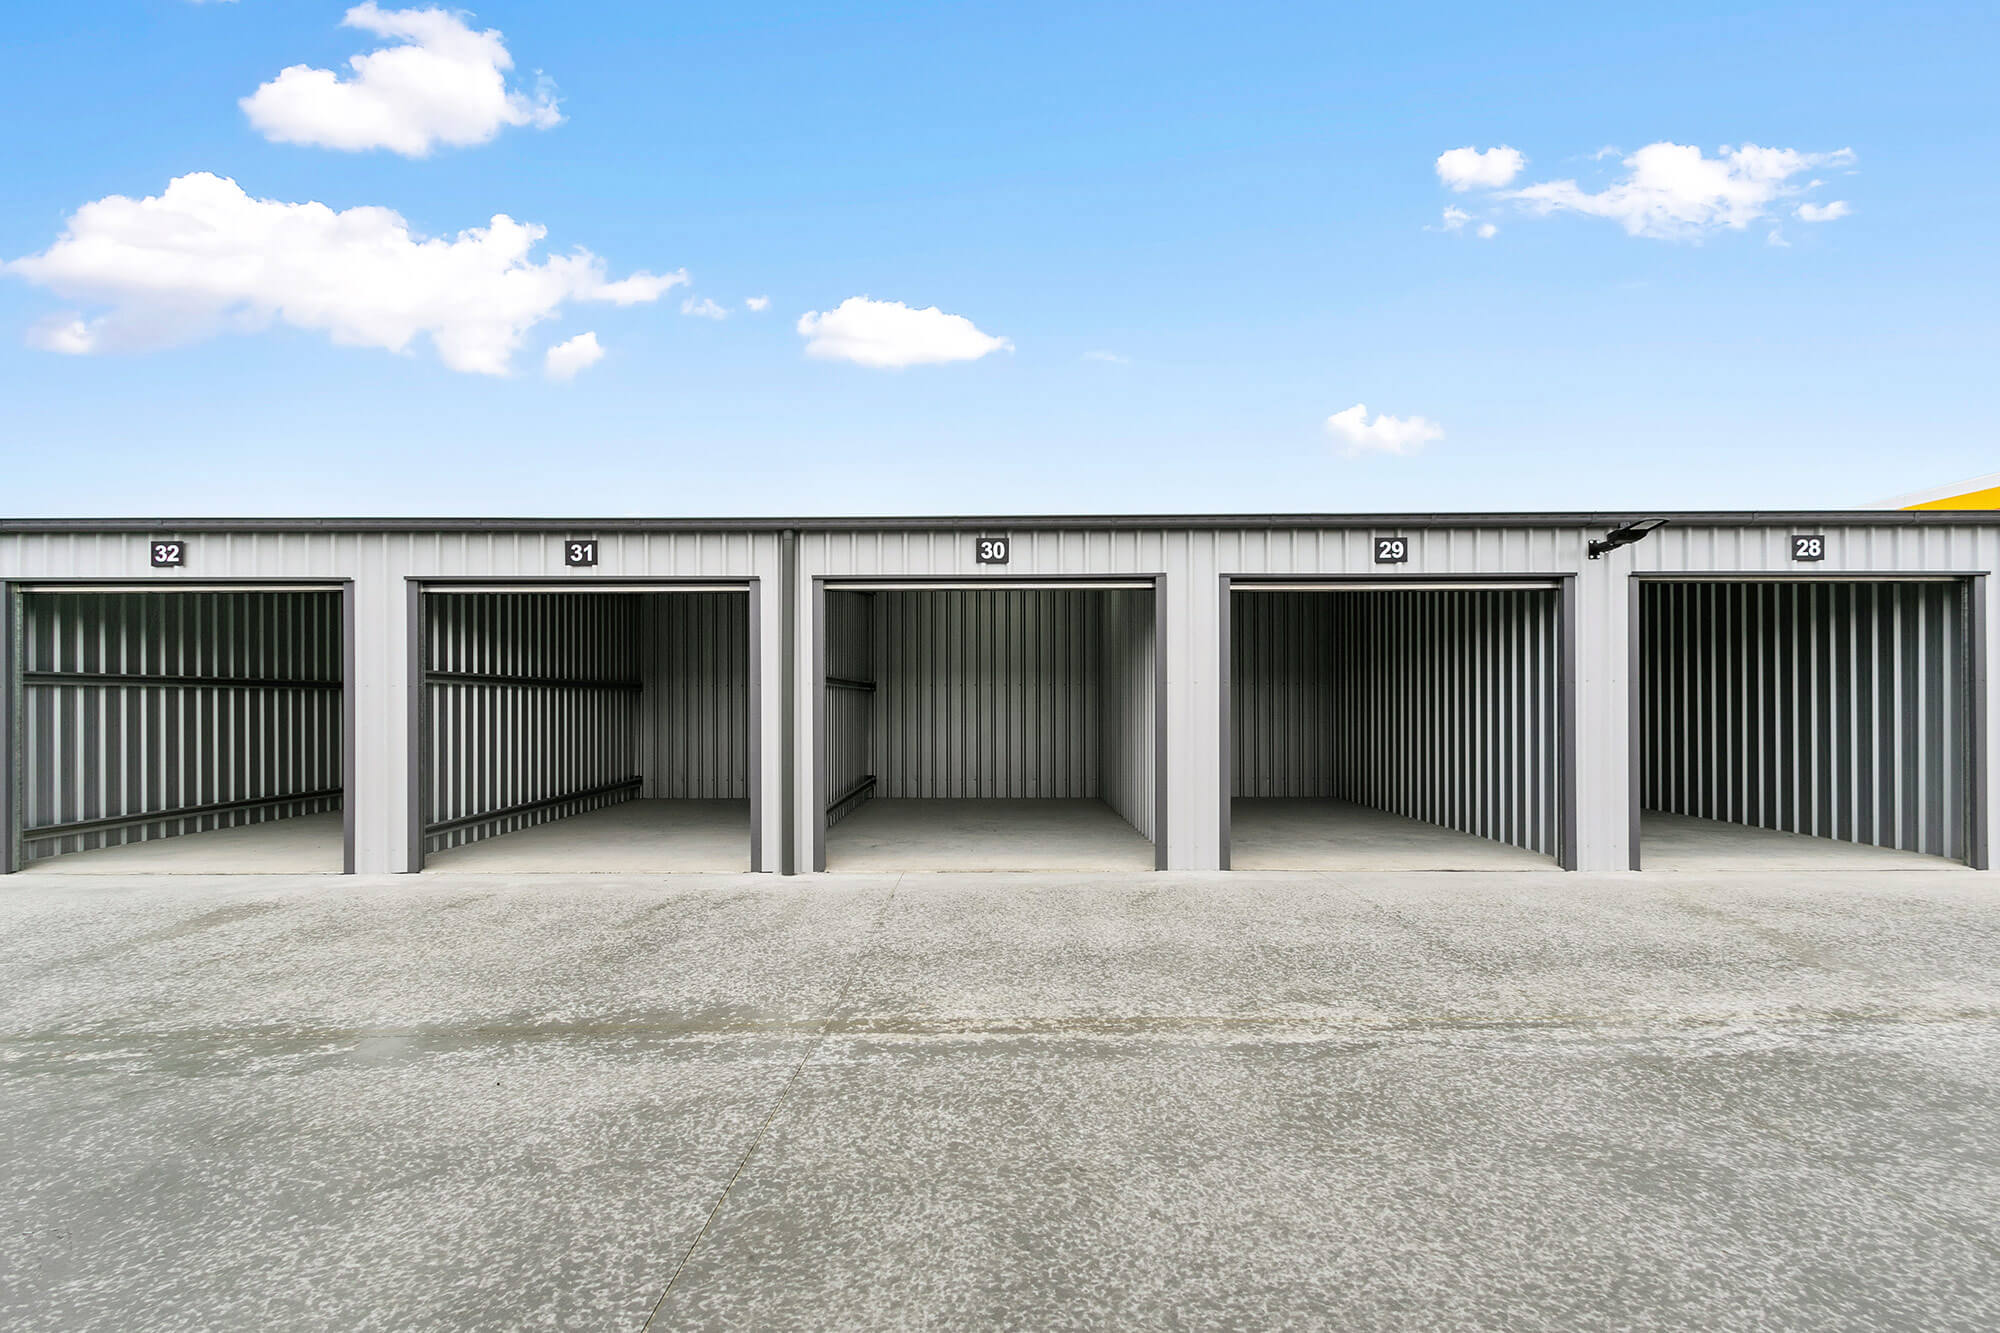 Photo of new storage shed facility, with rows of grey storage shed with black roller doors. Doors are open.